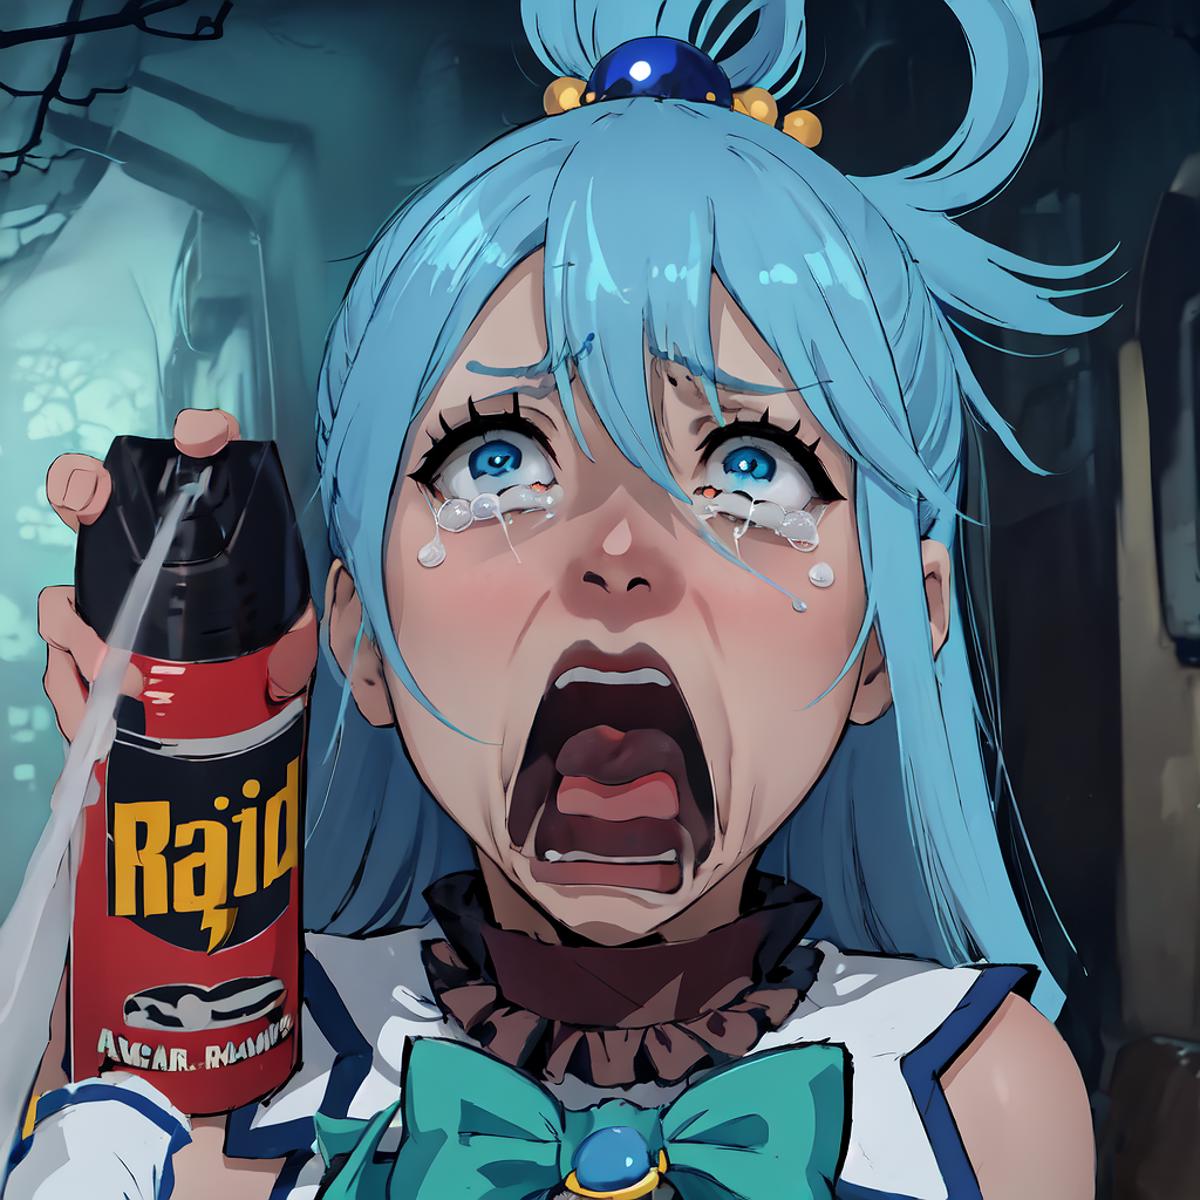 A cartoon girl with blue eyes is holding a spray bottle and crying.